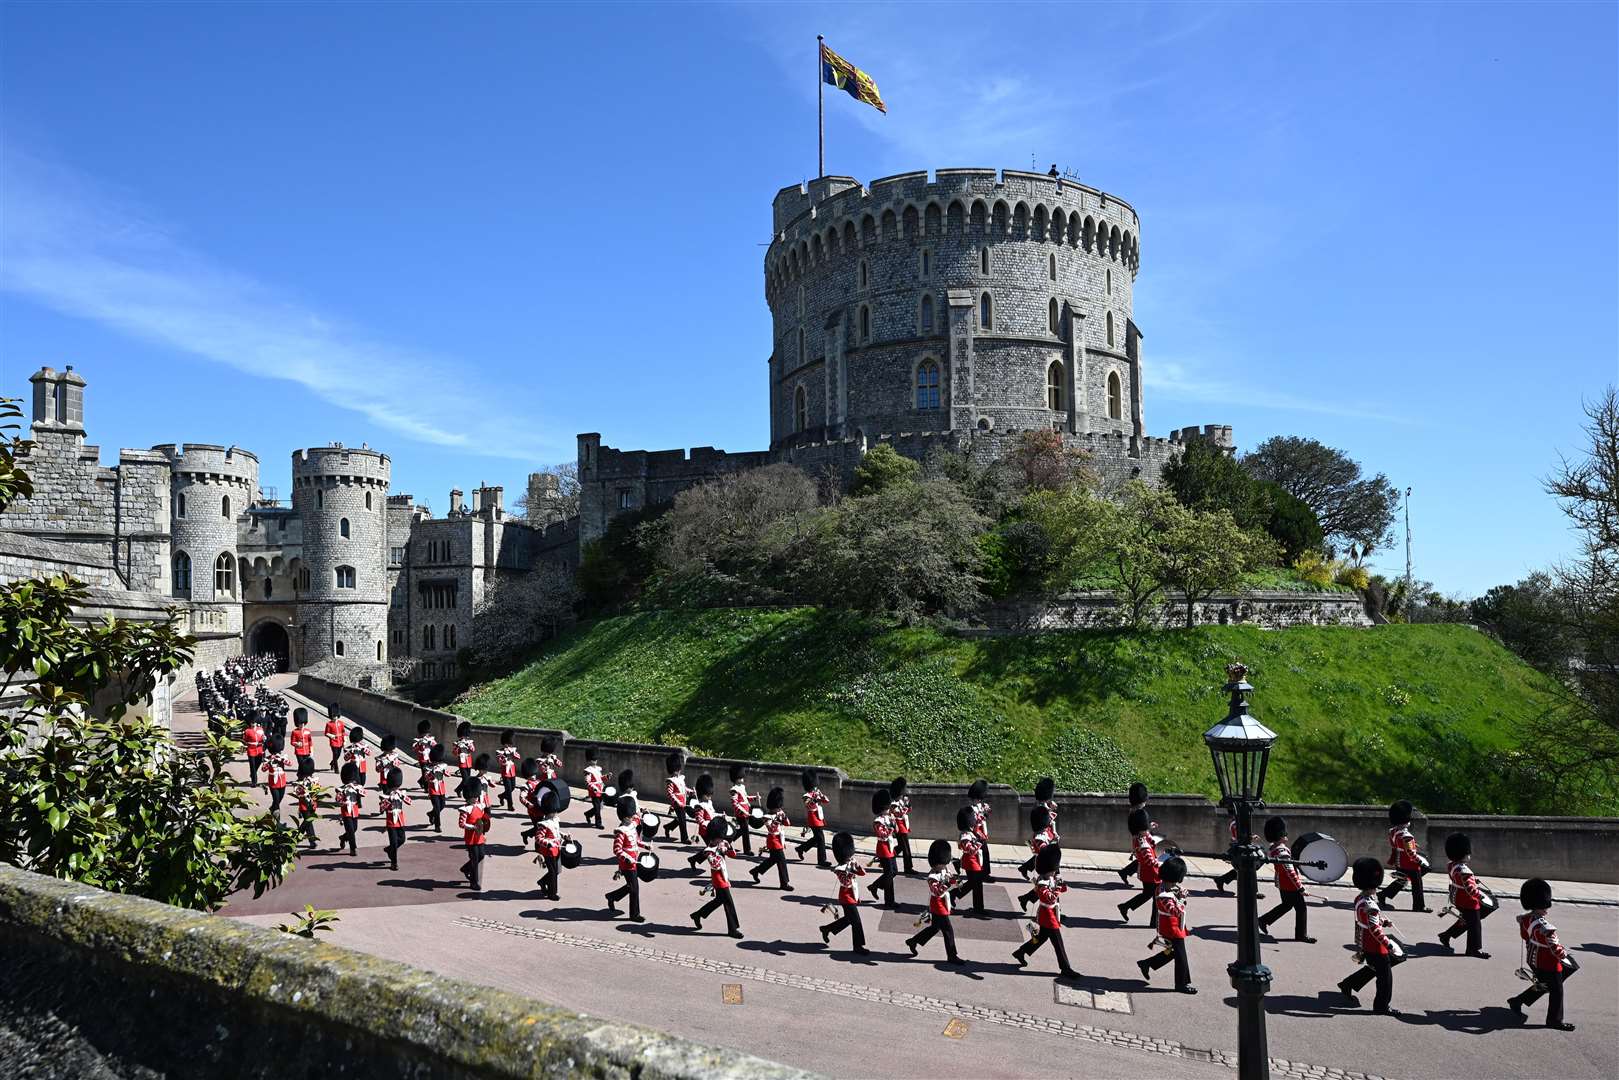 The Foot Guards Band are seen marching into position at Windsor Castle (Leon Neal/PA)